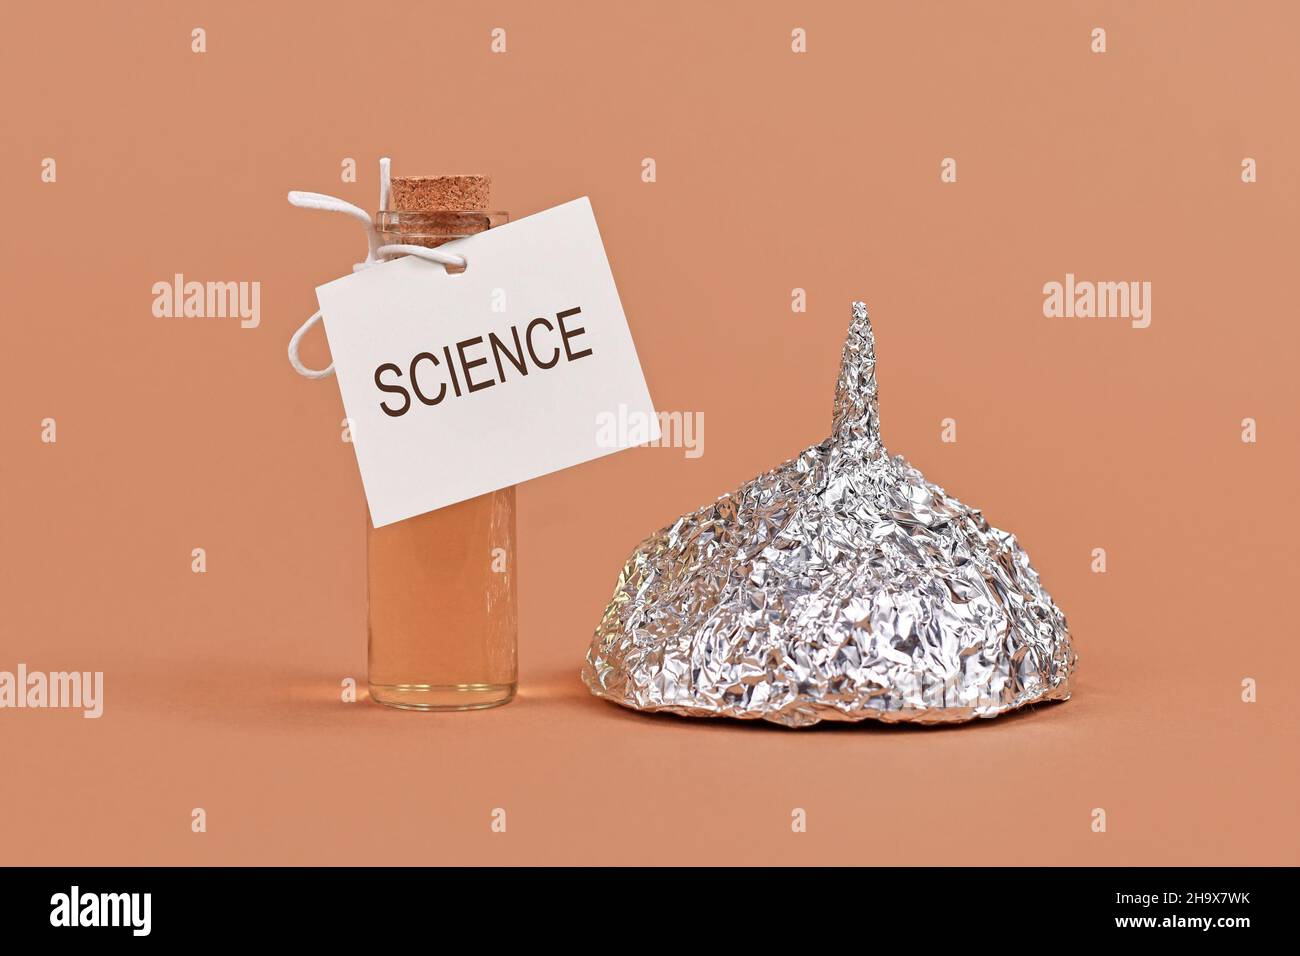 Concept for fighting conspiracy theories with science with tinfoil hat and cure bottle Stock Photo